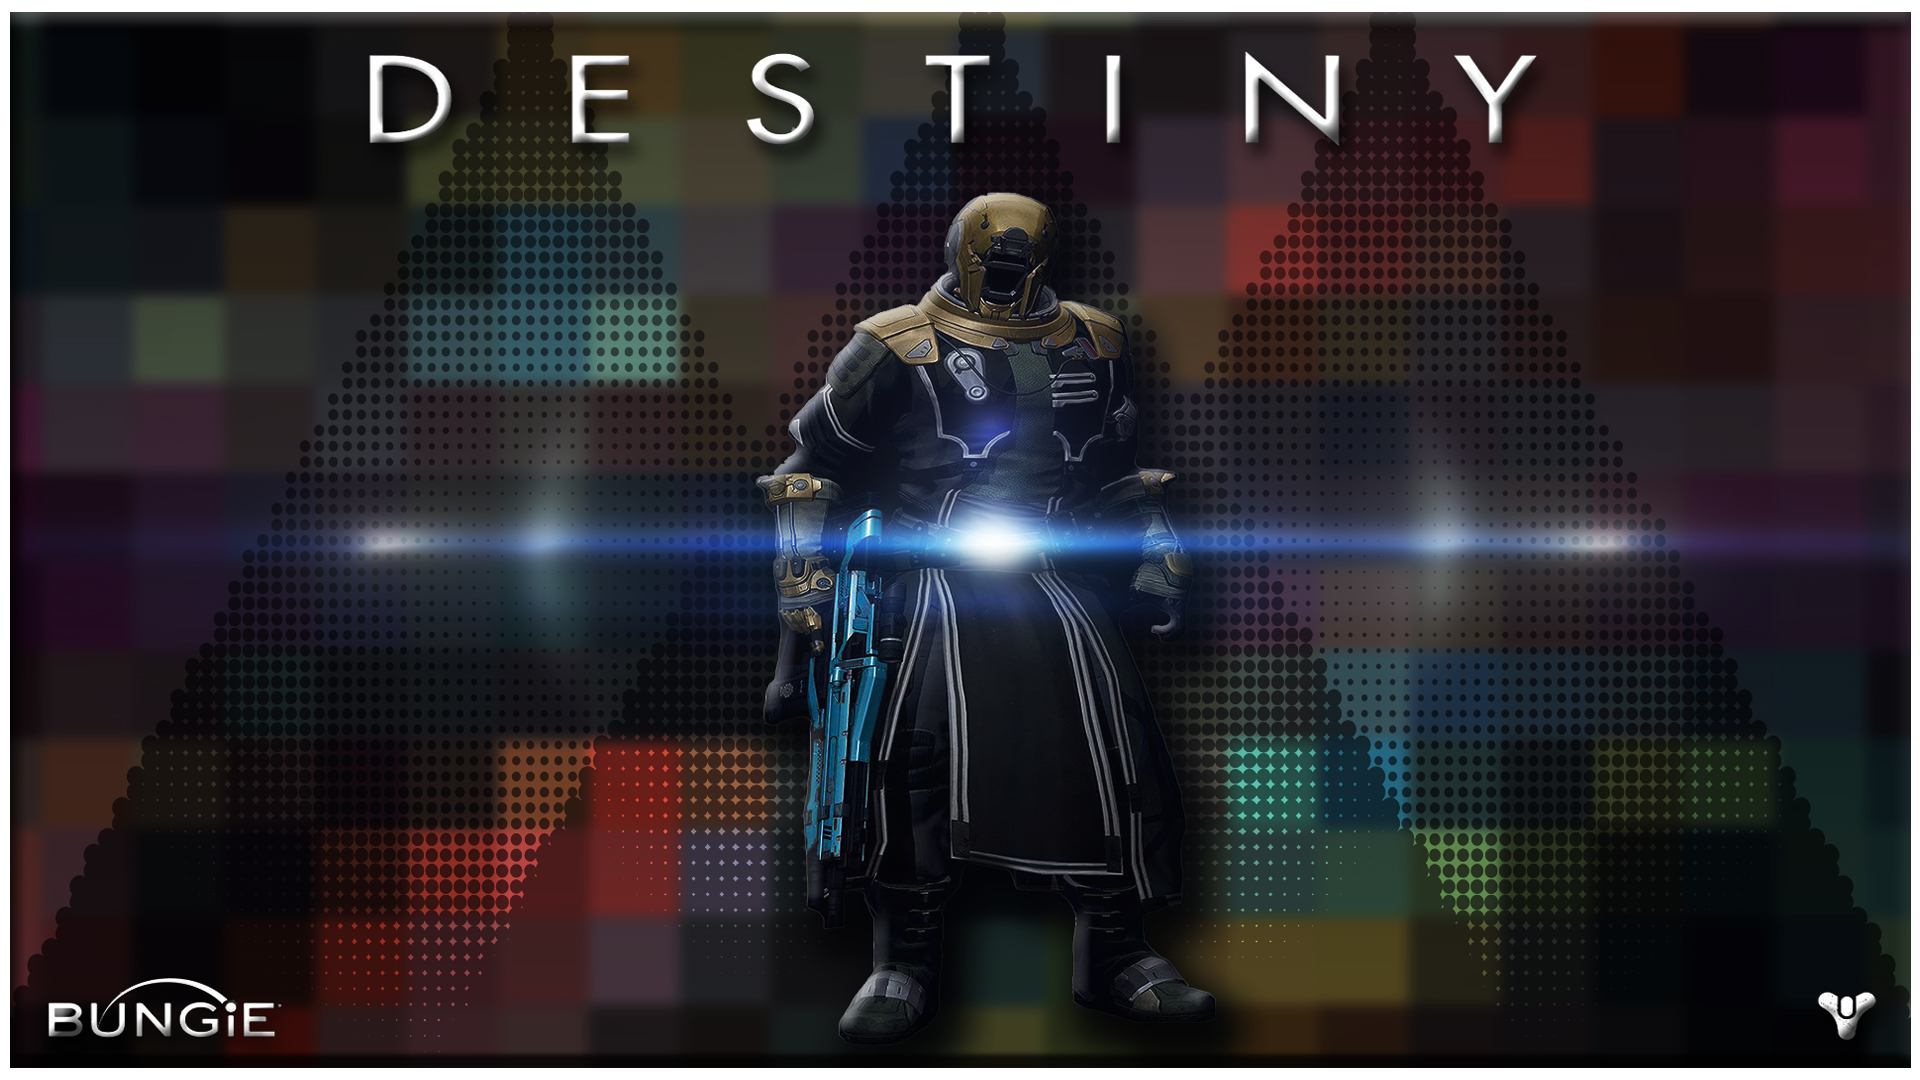 Bungie S Destiny A Warlock Inner Strength By Tdproductionstudios